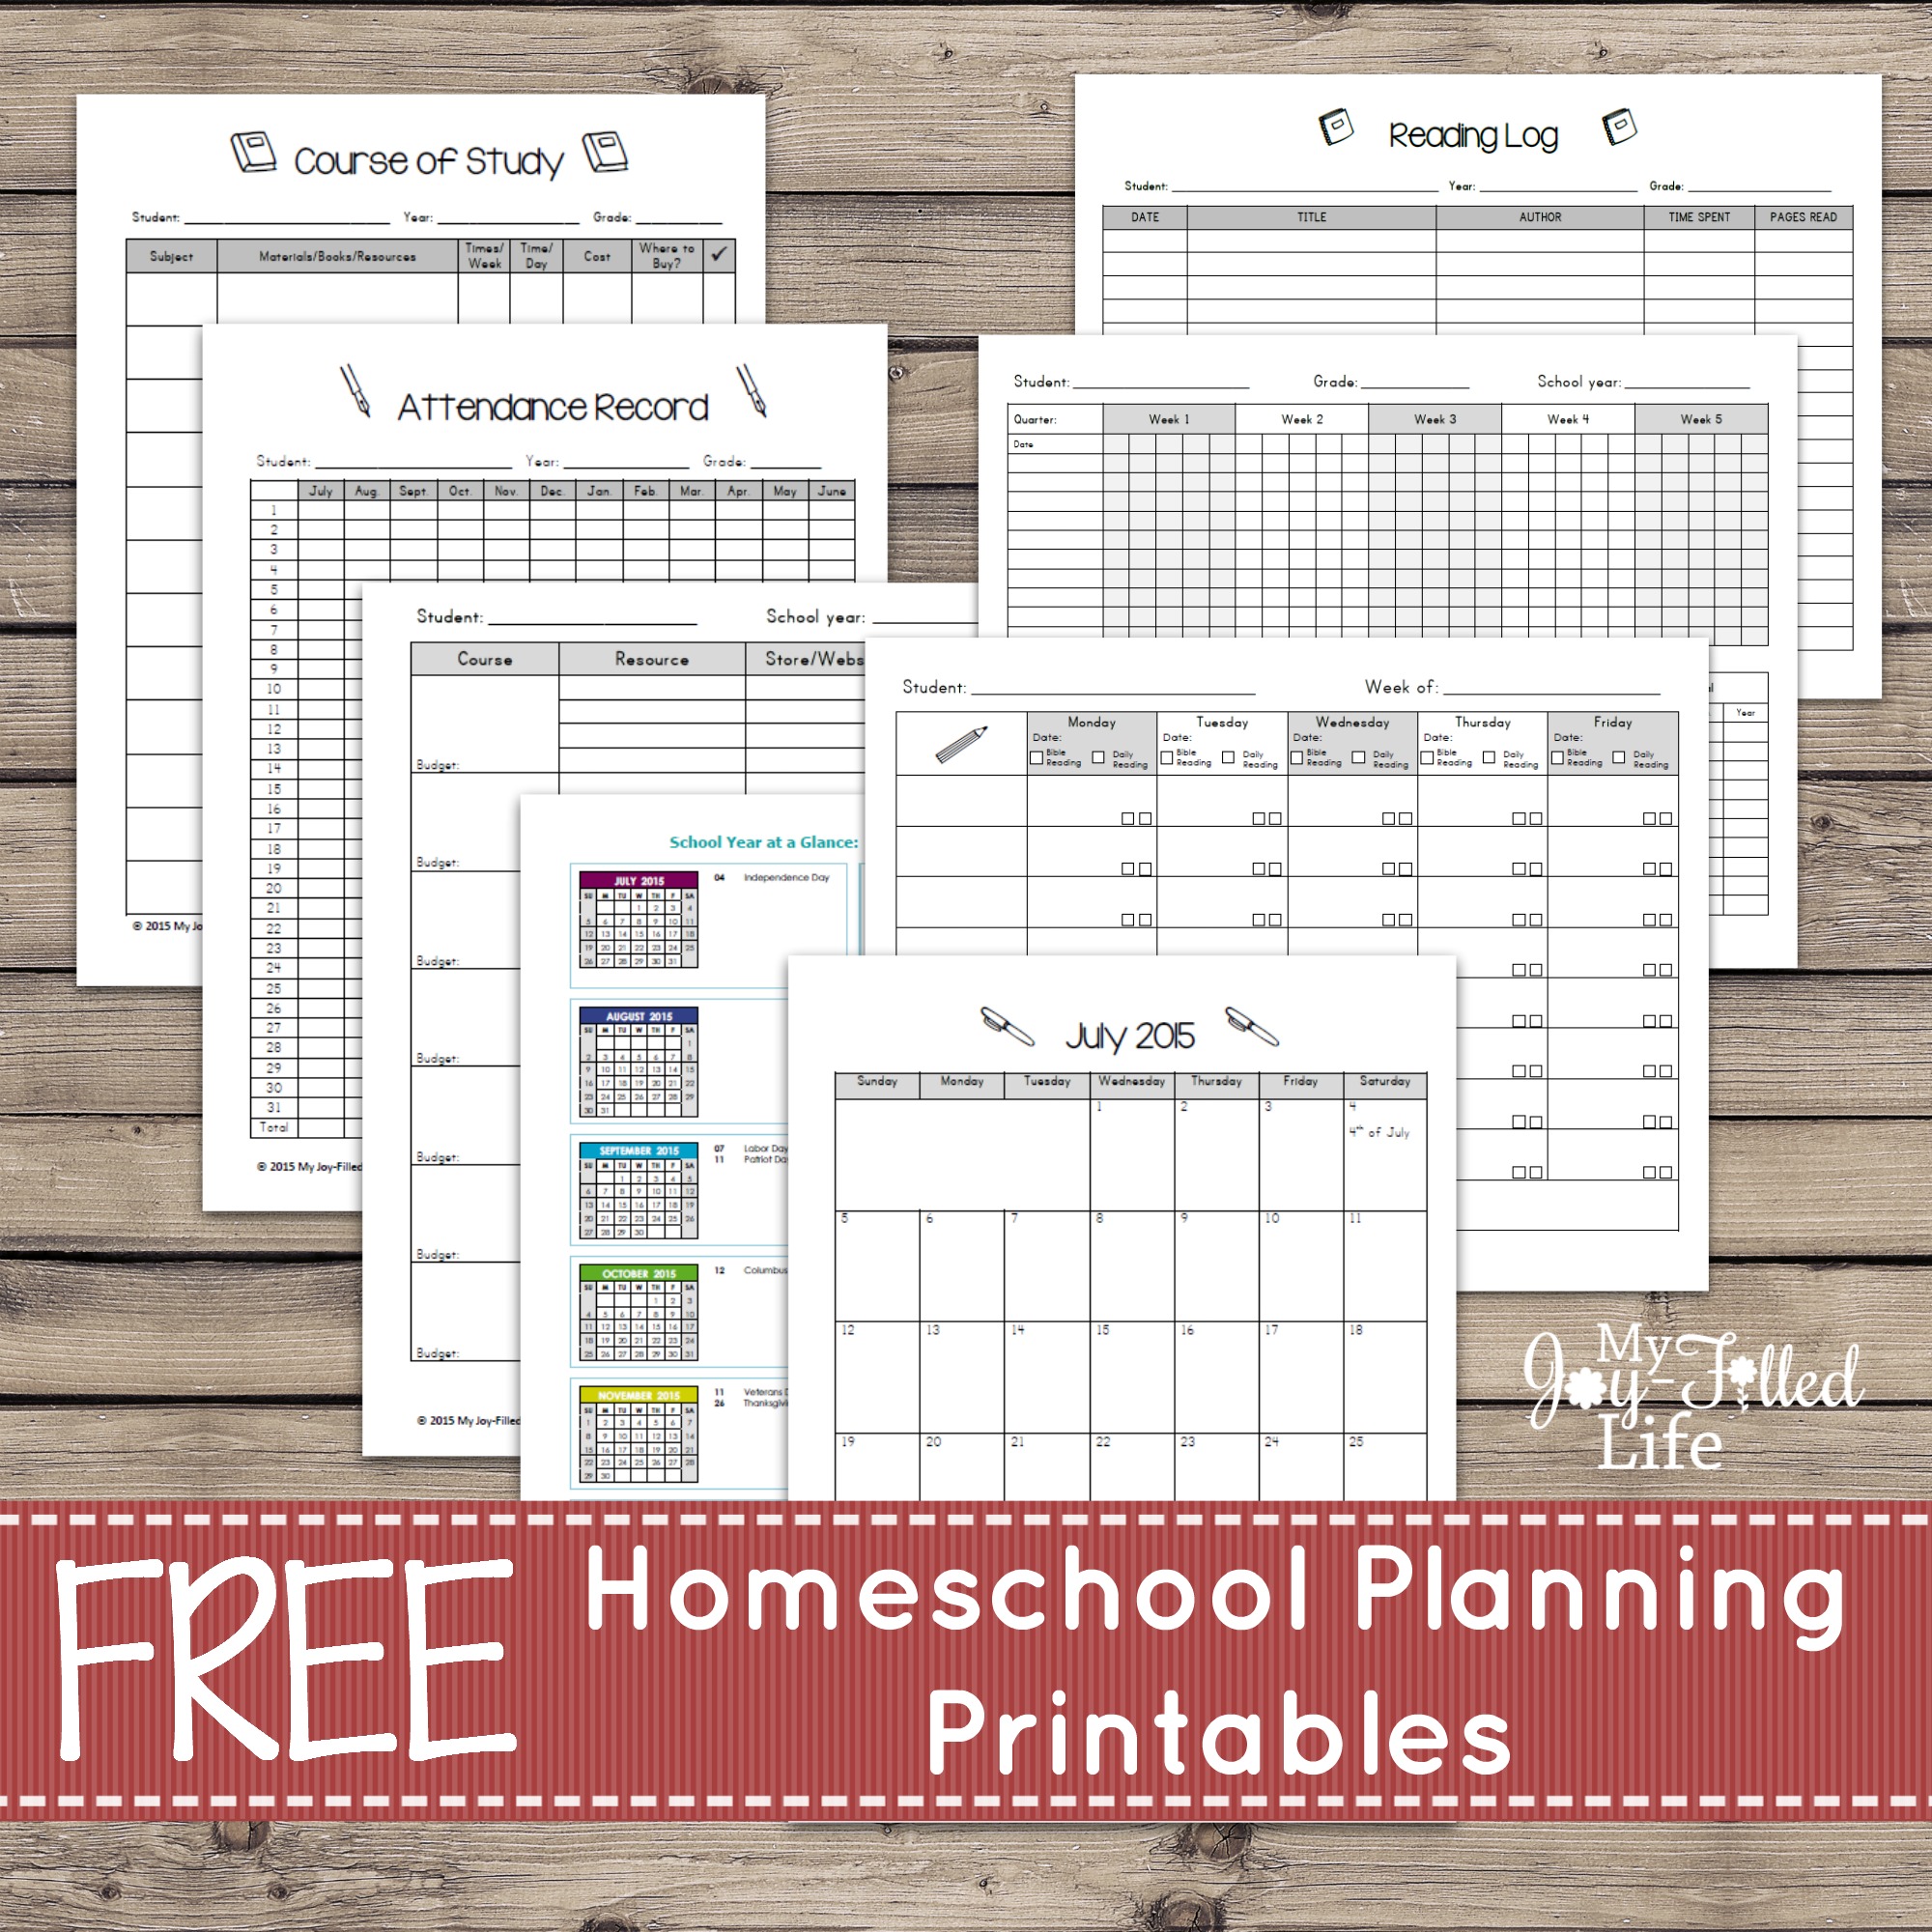 Homeschool Planning Resources FREE Printable Planning Pages - Life